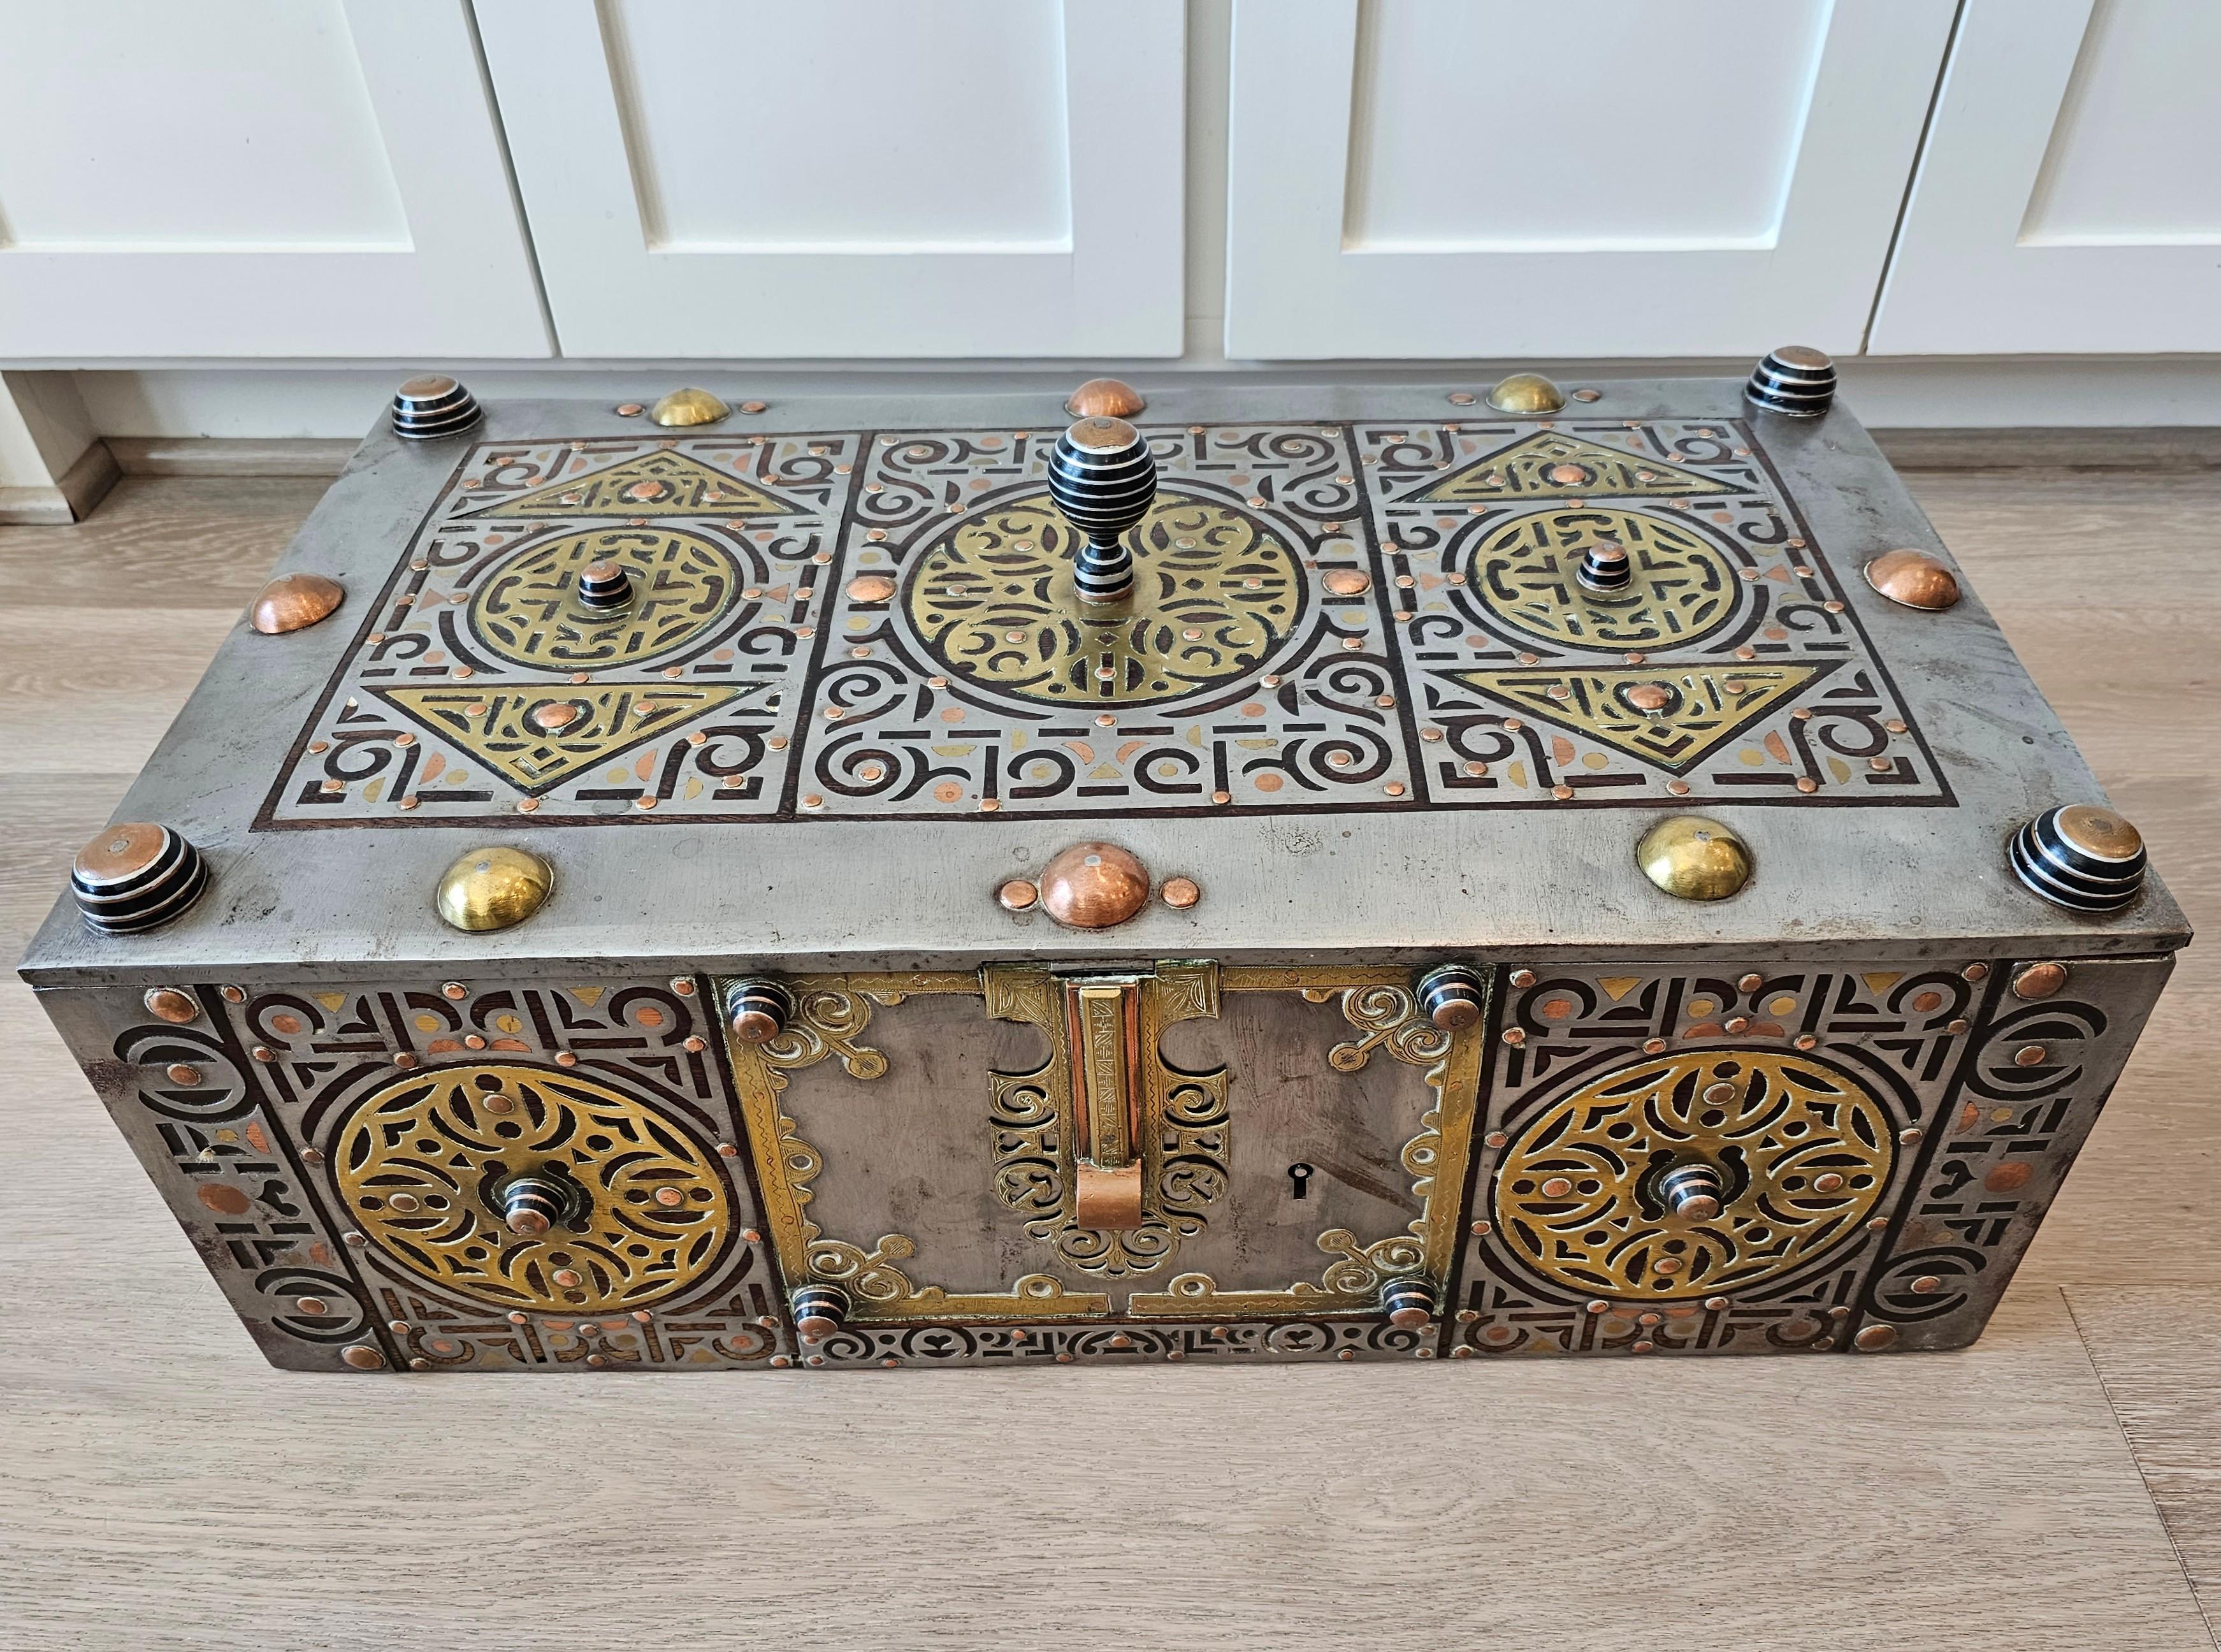 A rare and magnificent antique Tuareg peoples mixed metal mounted wooden chest / coffer / monumental table box. 

Most impressive size, hand-crafted in Mauritania, Northwest Africa, around the turn of the late 19th / early 20th century, very